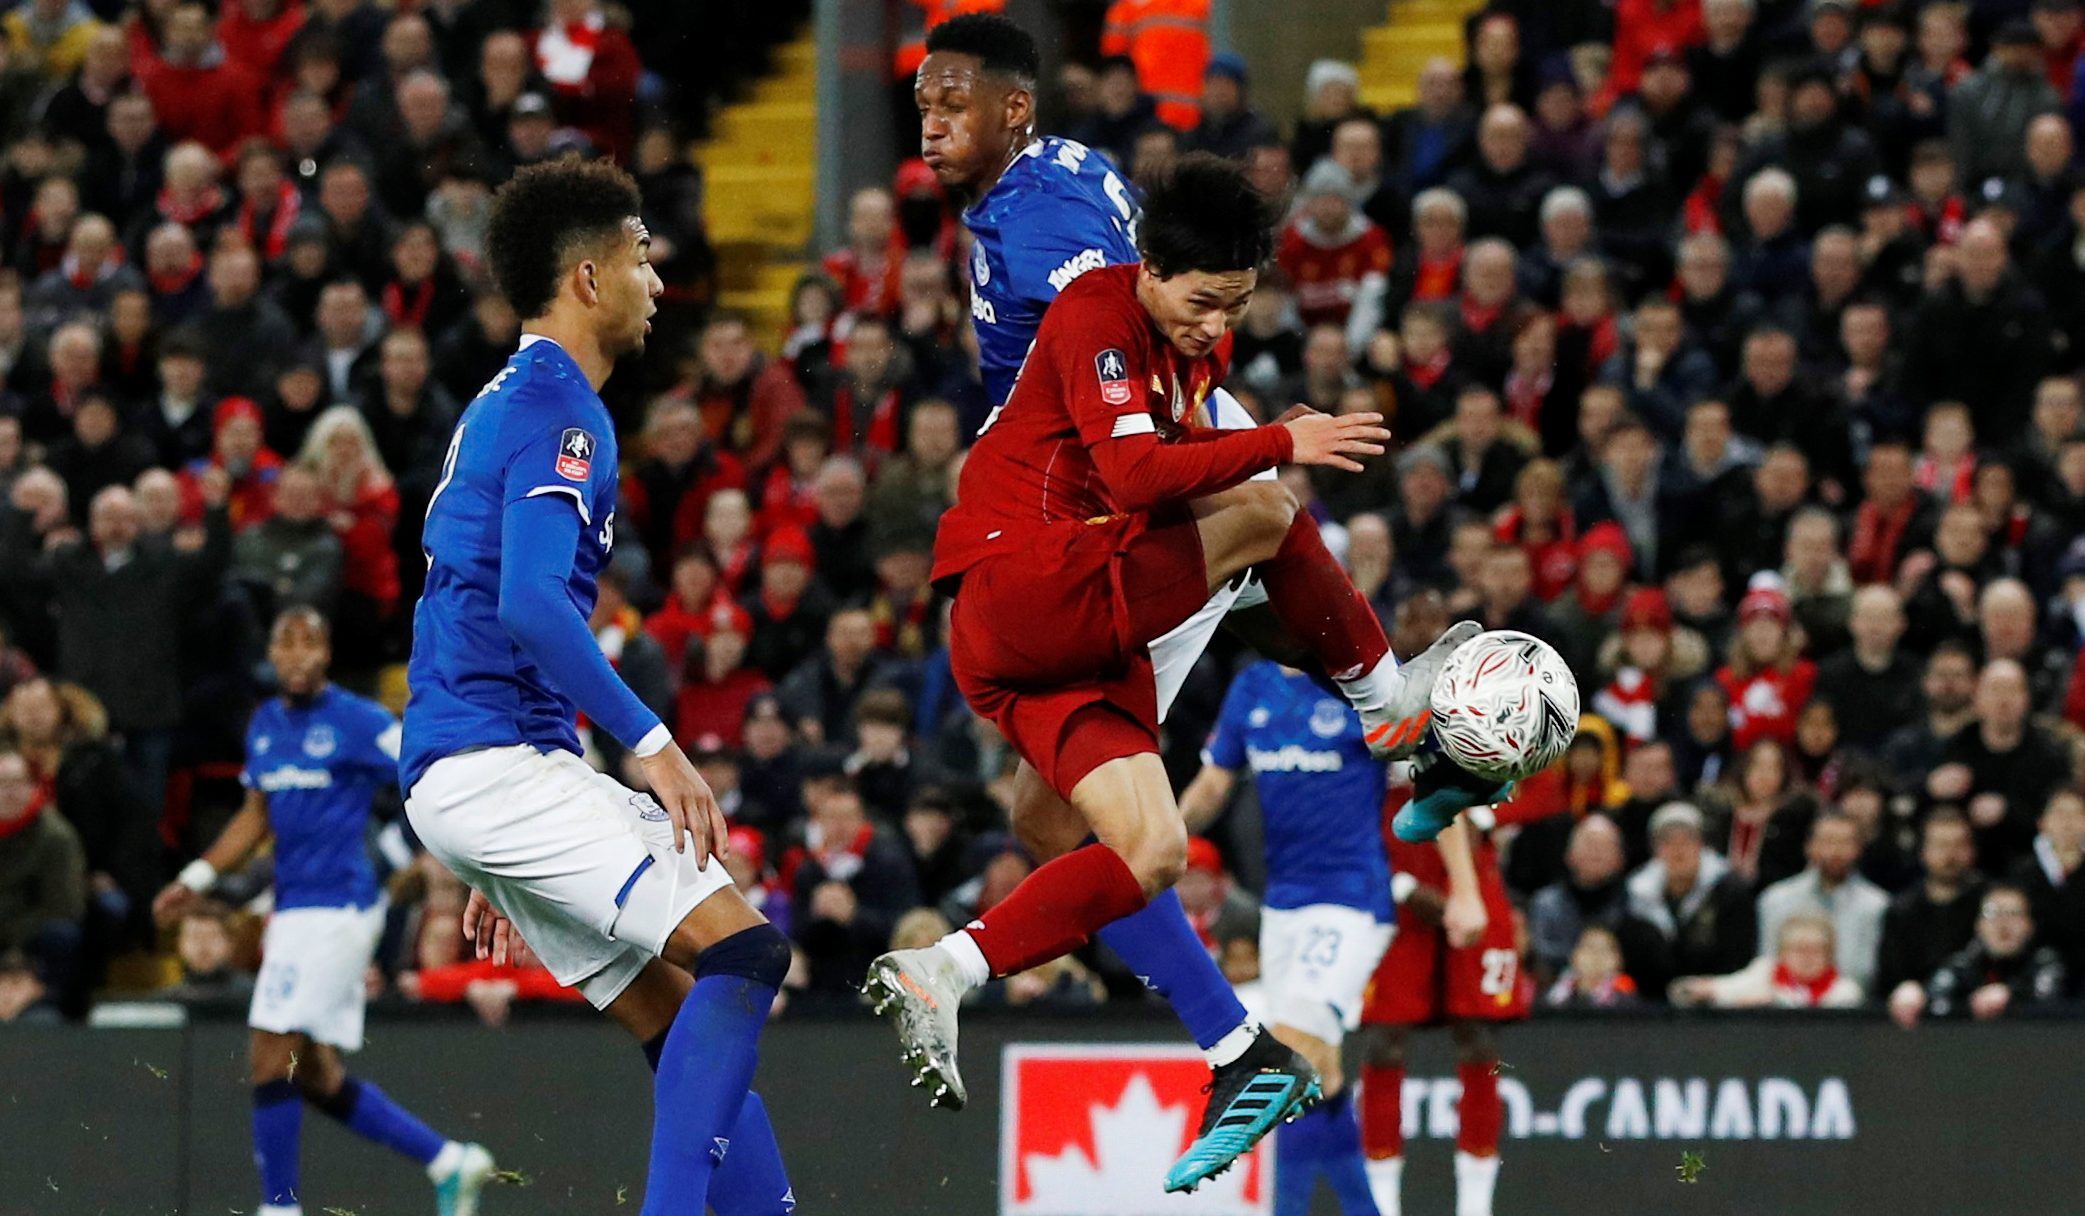 Soccer Football - FA Cup - Third Round - Liverpool v Everton - Anfield, Liverpool, Britain - January 5, 2020  Liverpool's Takumi Minamino in action with Everton's Yerry Mina and Mason Holgate   REUTERS/Phil Noble